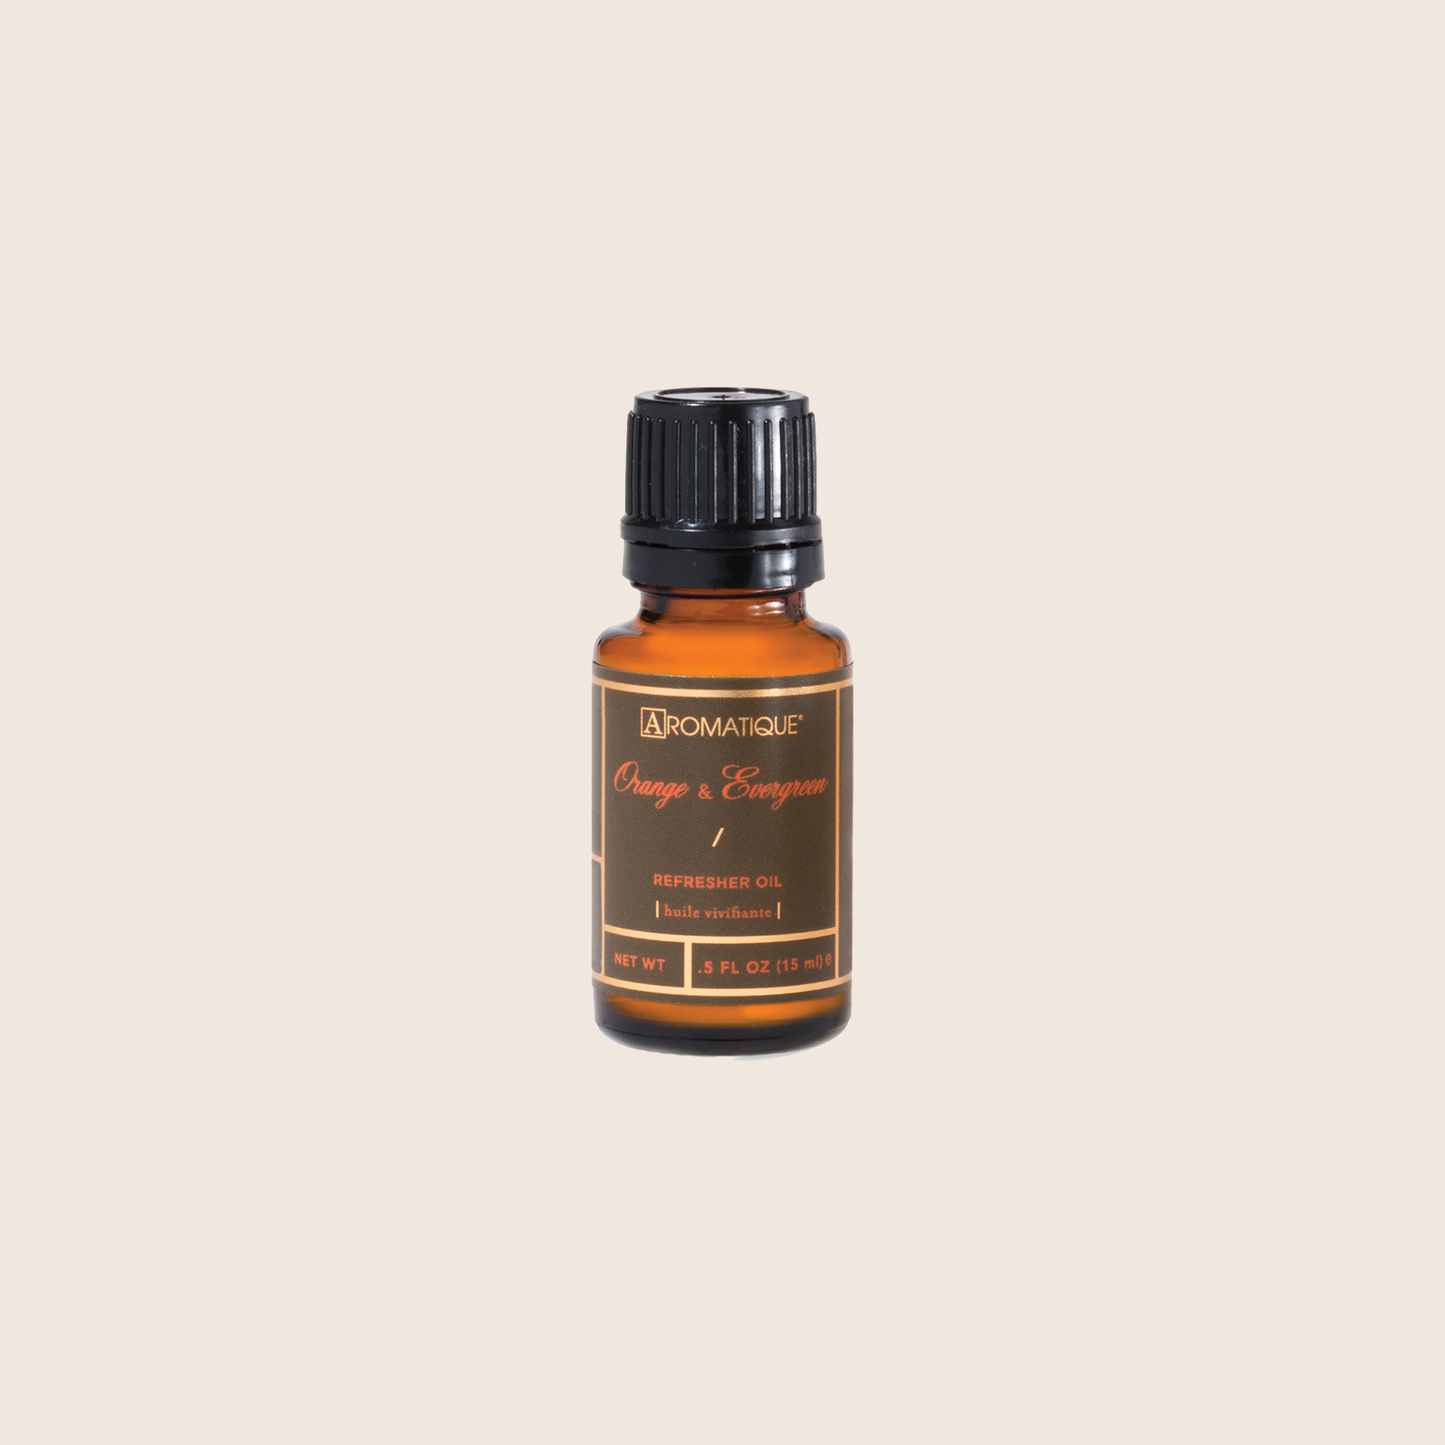 Orange & Evergreen Refresher Oil is designed to refresh your Decorative Fragrance year-round. The highly concentrated oil quickly absorbs into the wood chips and fills any space with a delightful holiday scent of fragrant citrus fruits with a touch of evergreen, cardamom, and florals.